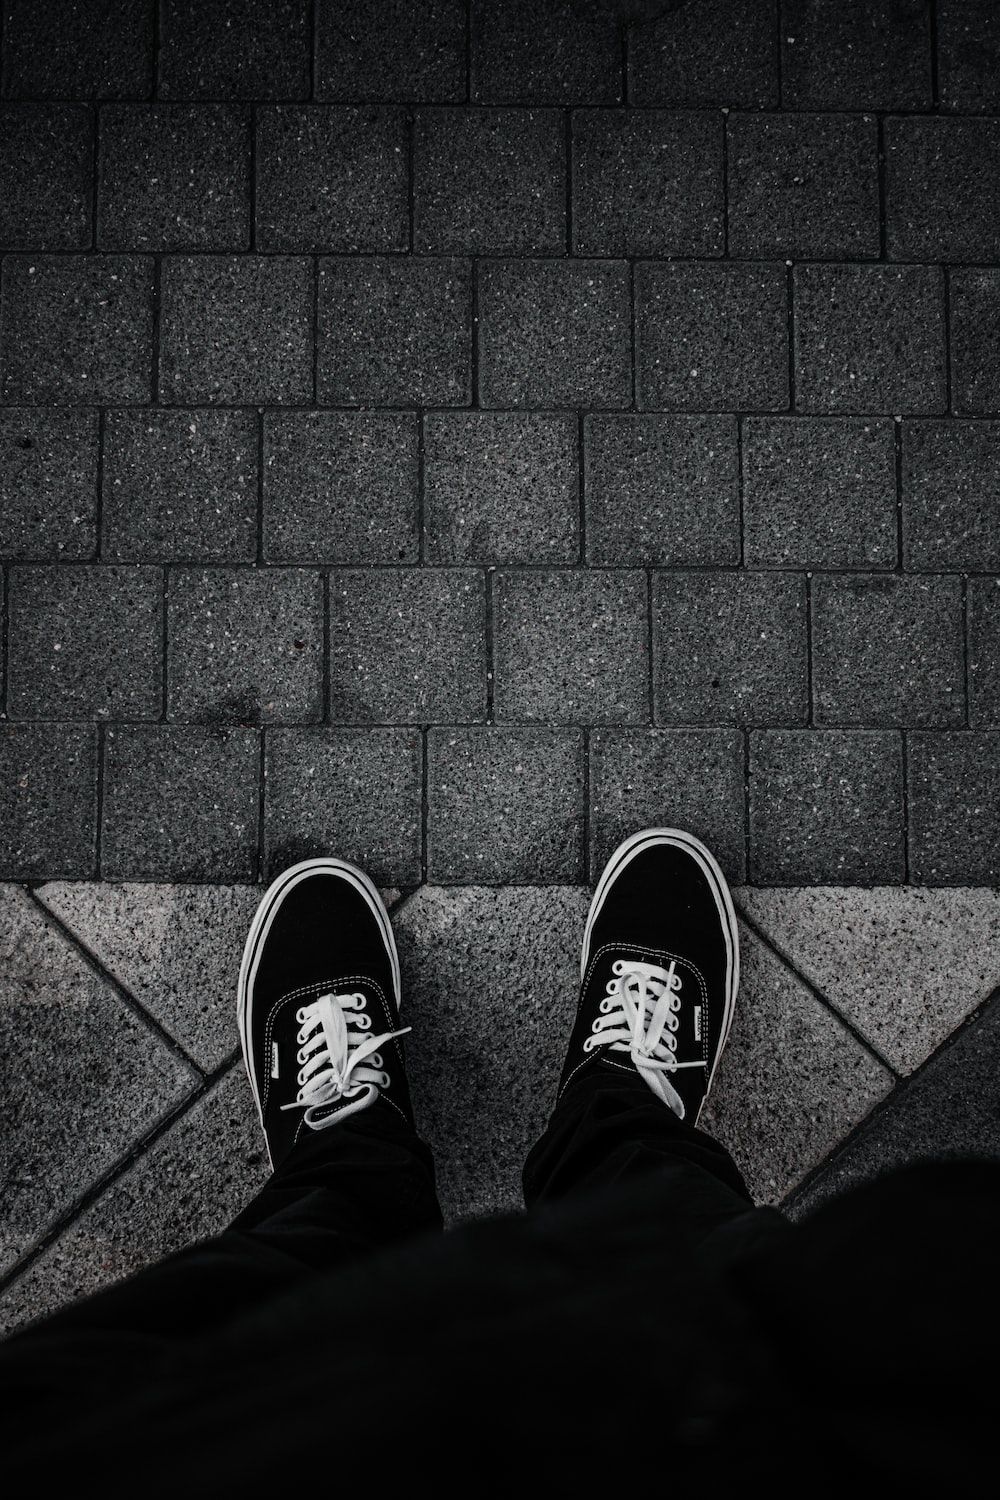 Person wearing black and white Vans sneakers standing on the sidewalk - Shoes, Vans